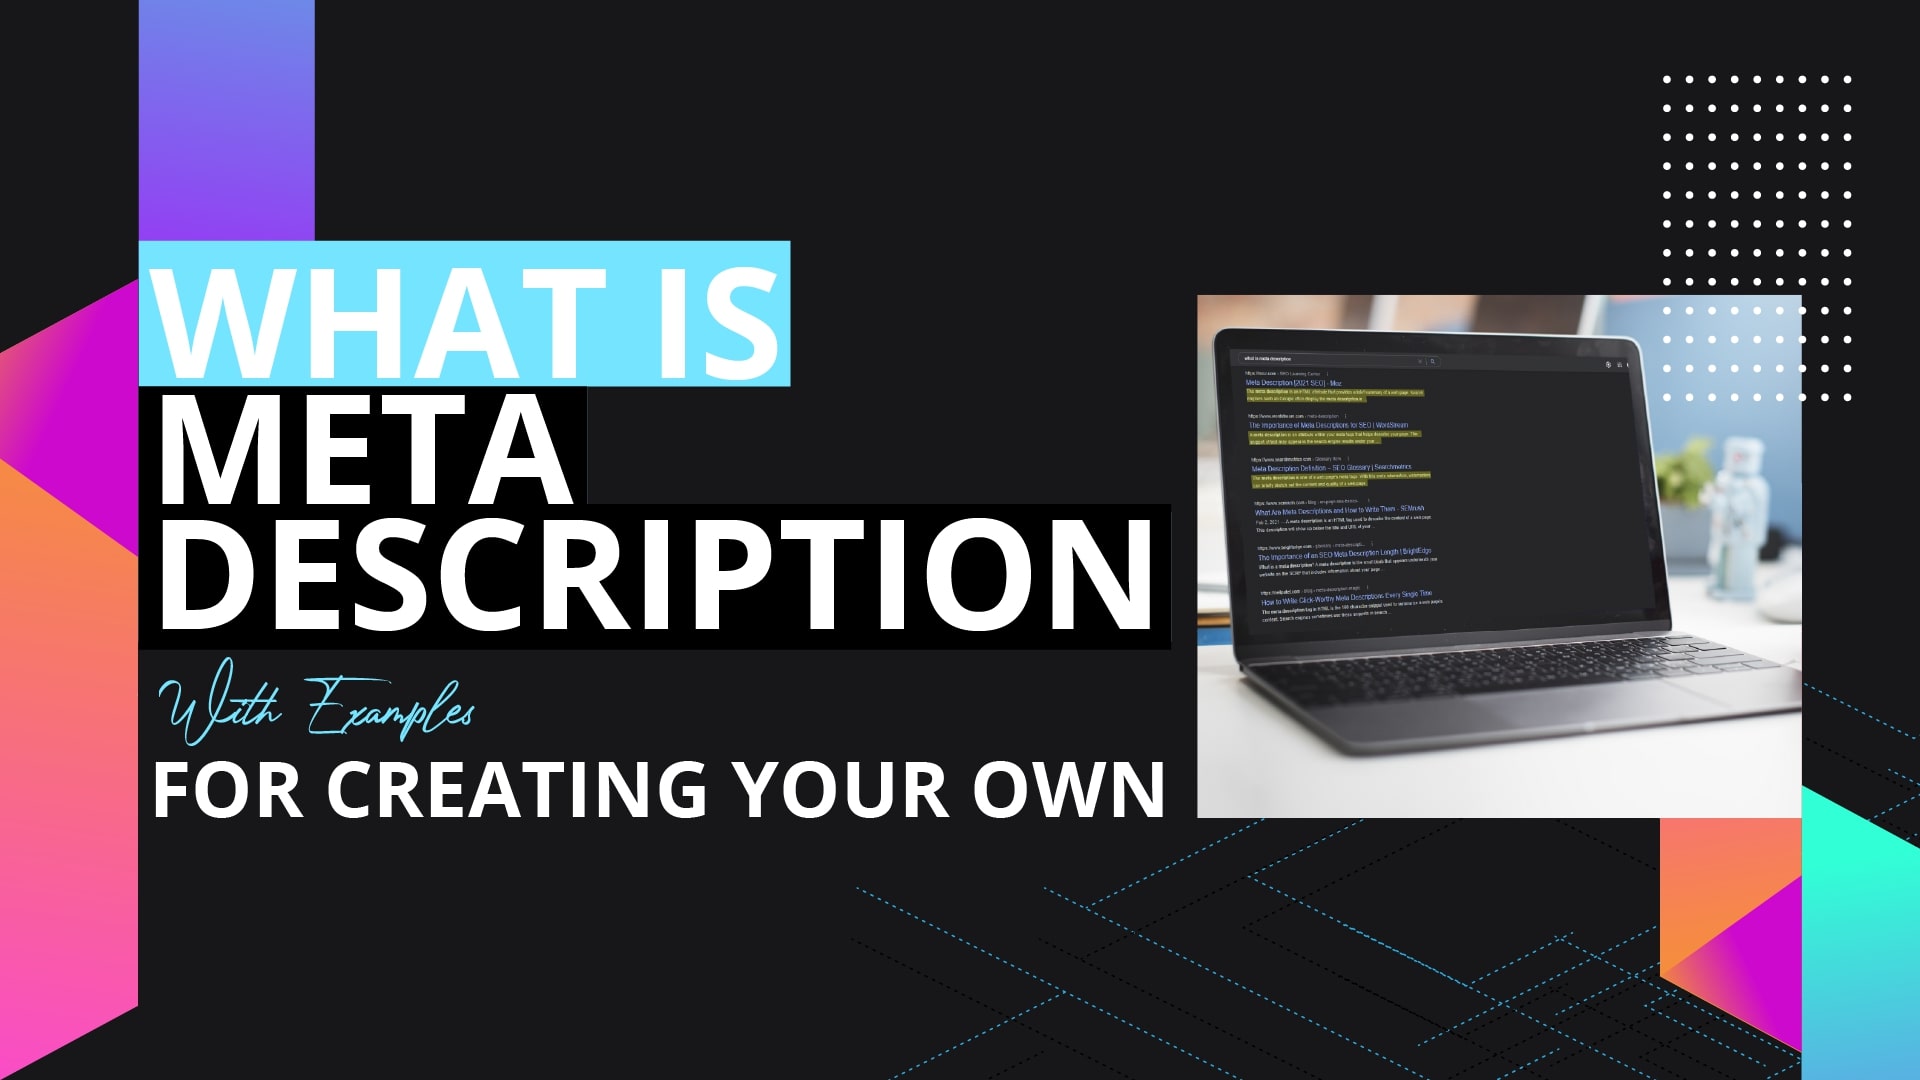 Meta Description Checker Tool | Useful Examples For Creating Your Own